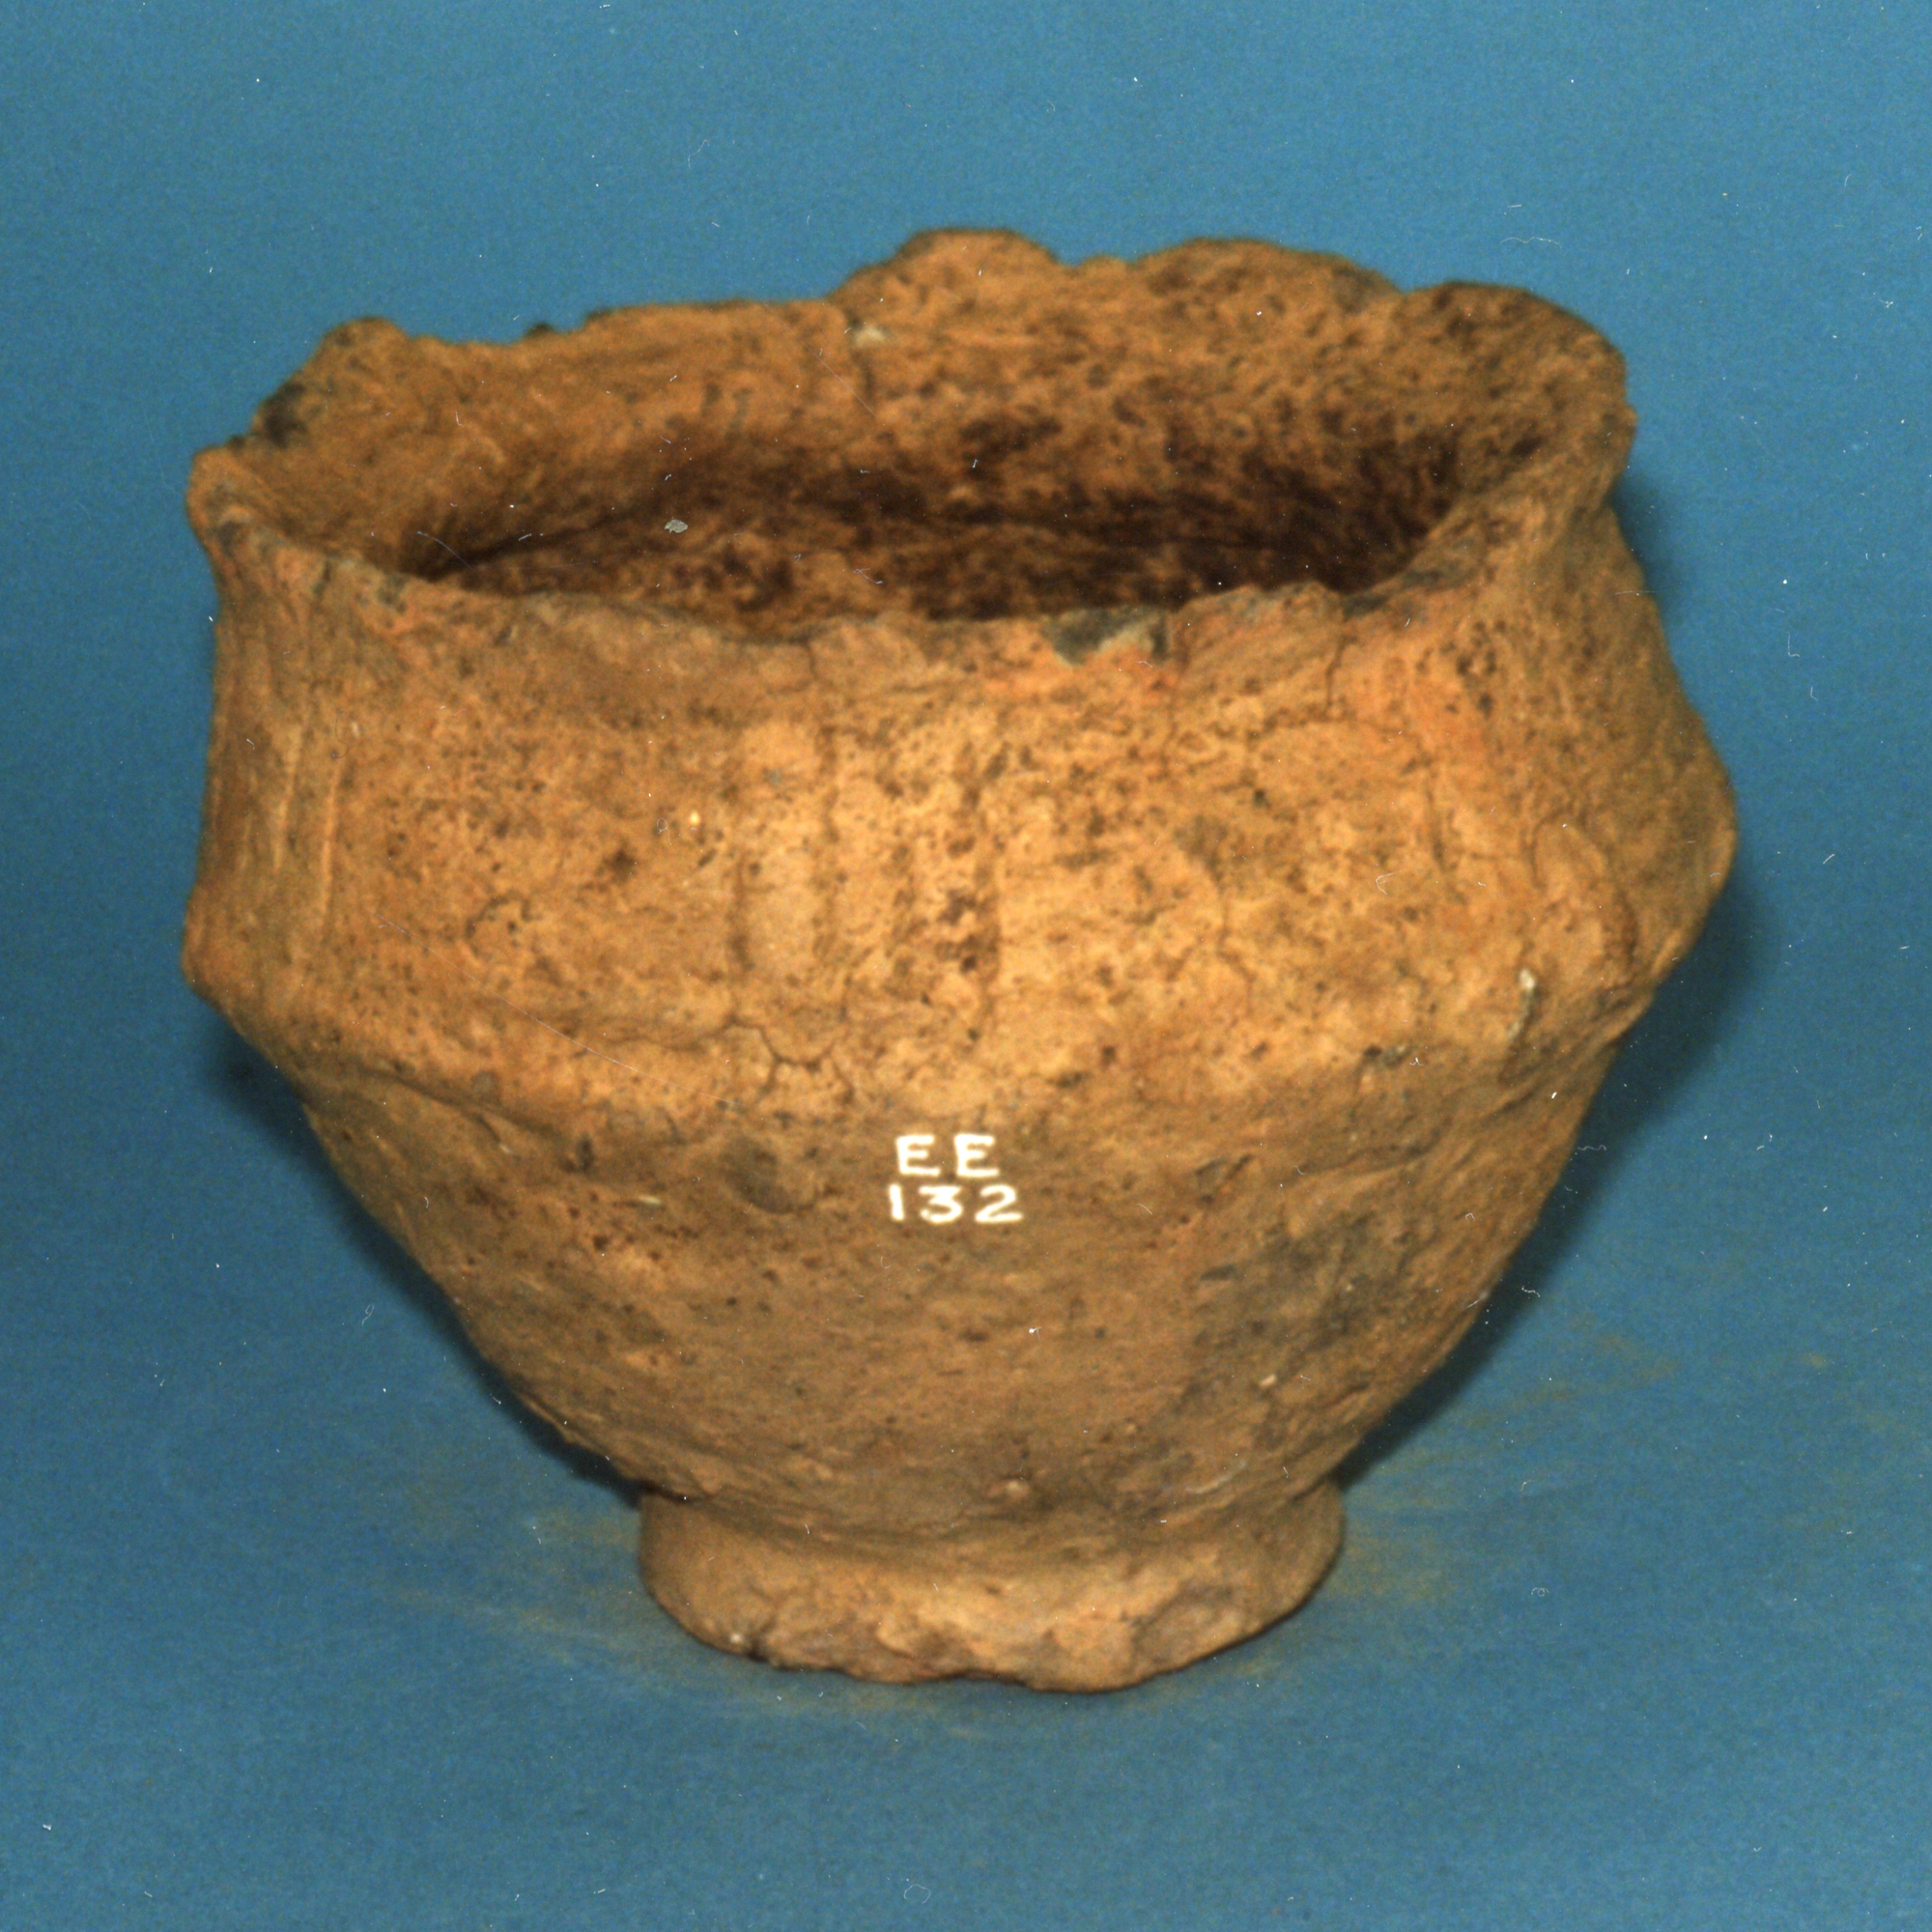 Image of Pottery food vessel from a cist in Gallows Hill, Kirkbuddo, Forfarshire © National Museums Scotland